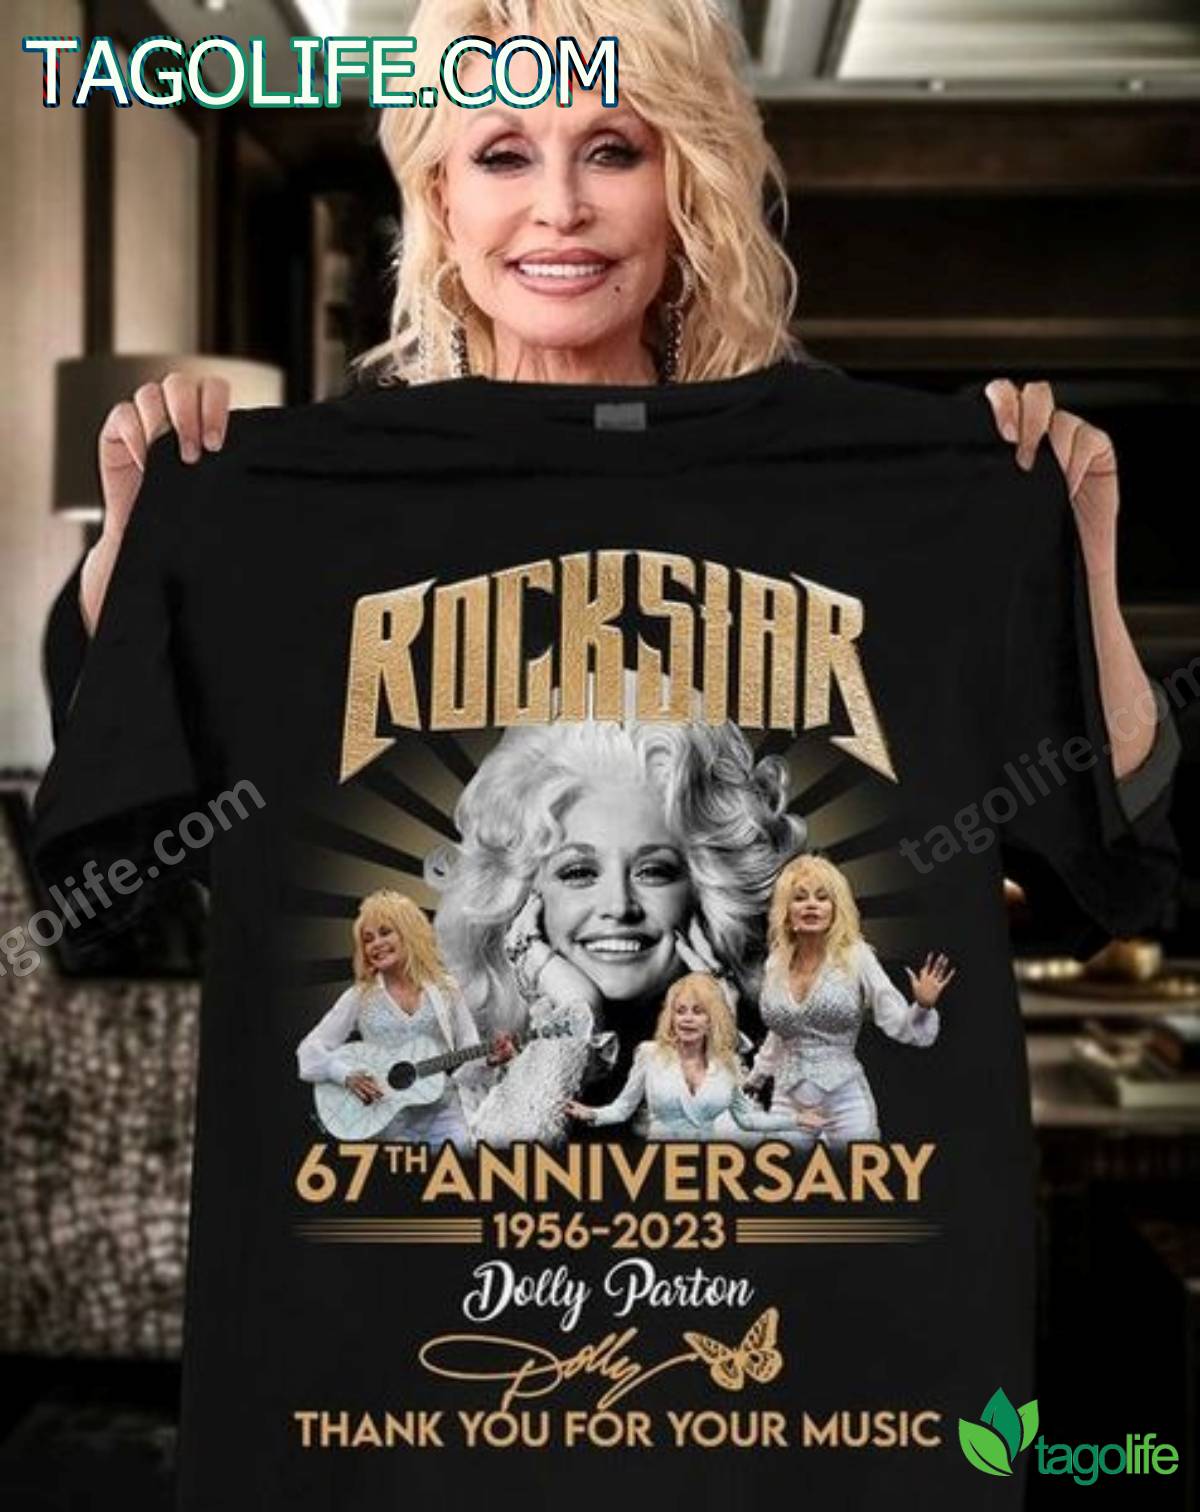 Rockstar 67 Anniversary 1956-2023 Dolly Parton Thank You For Your Music T-shirt